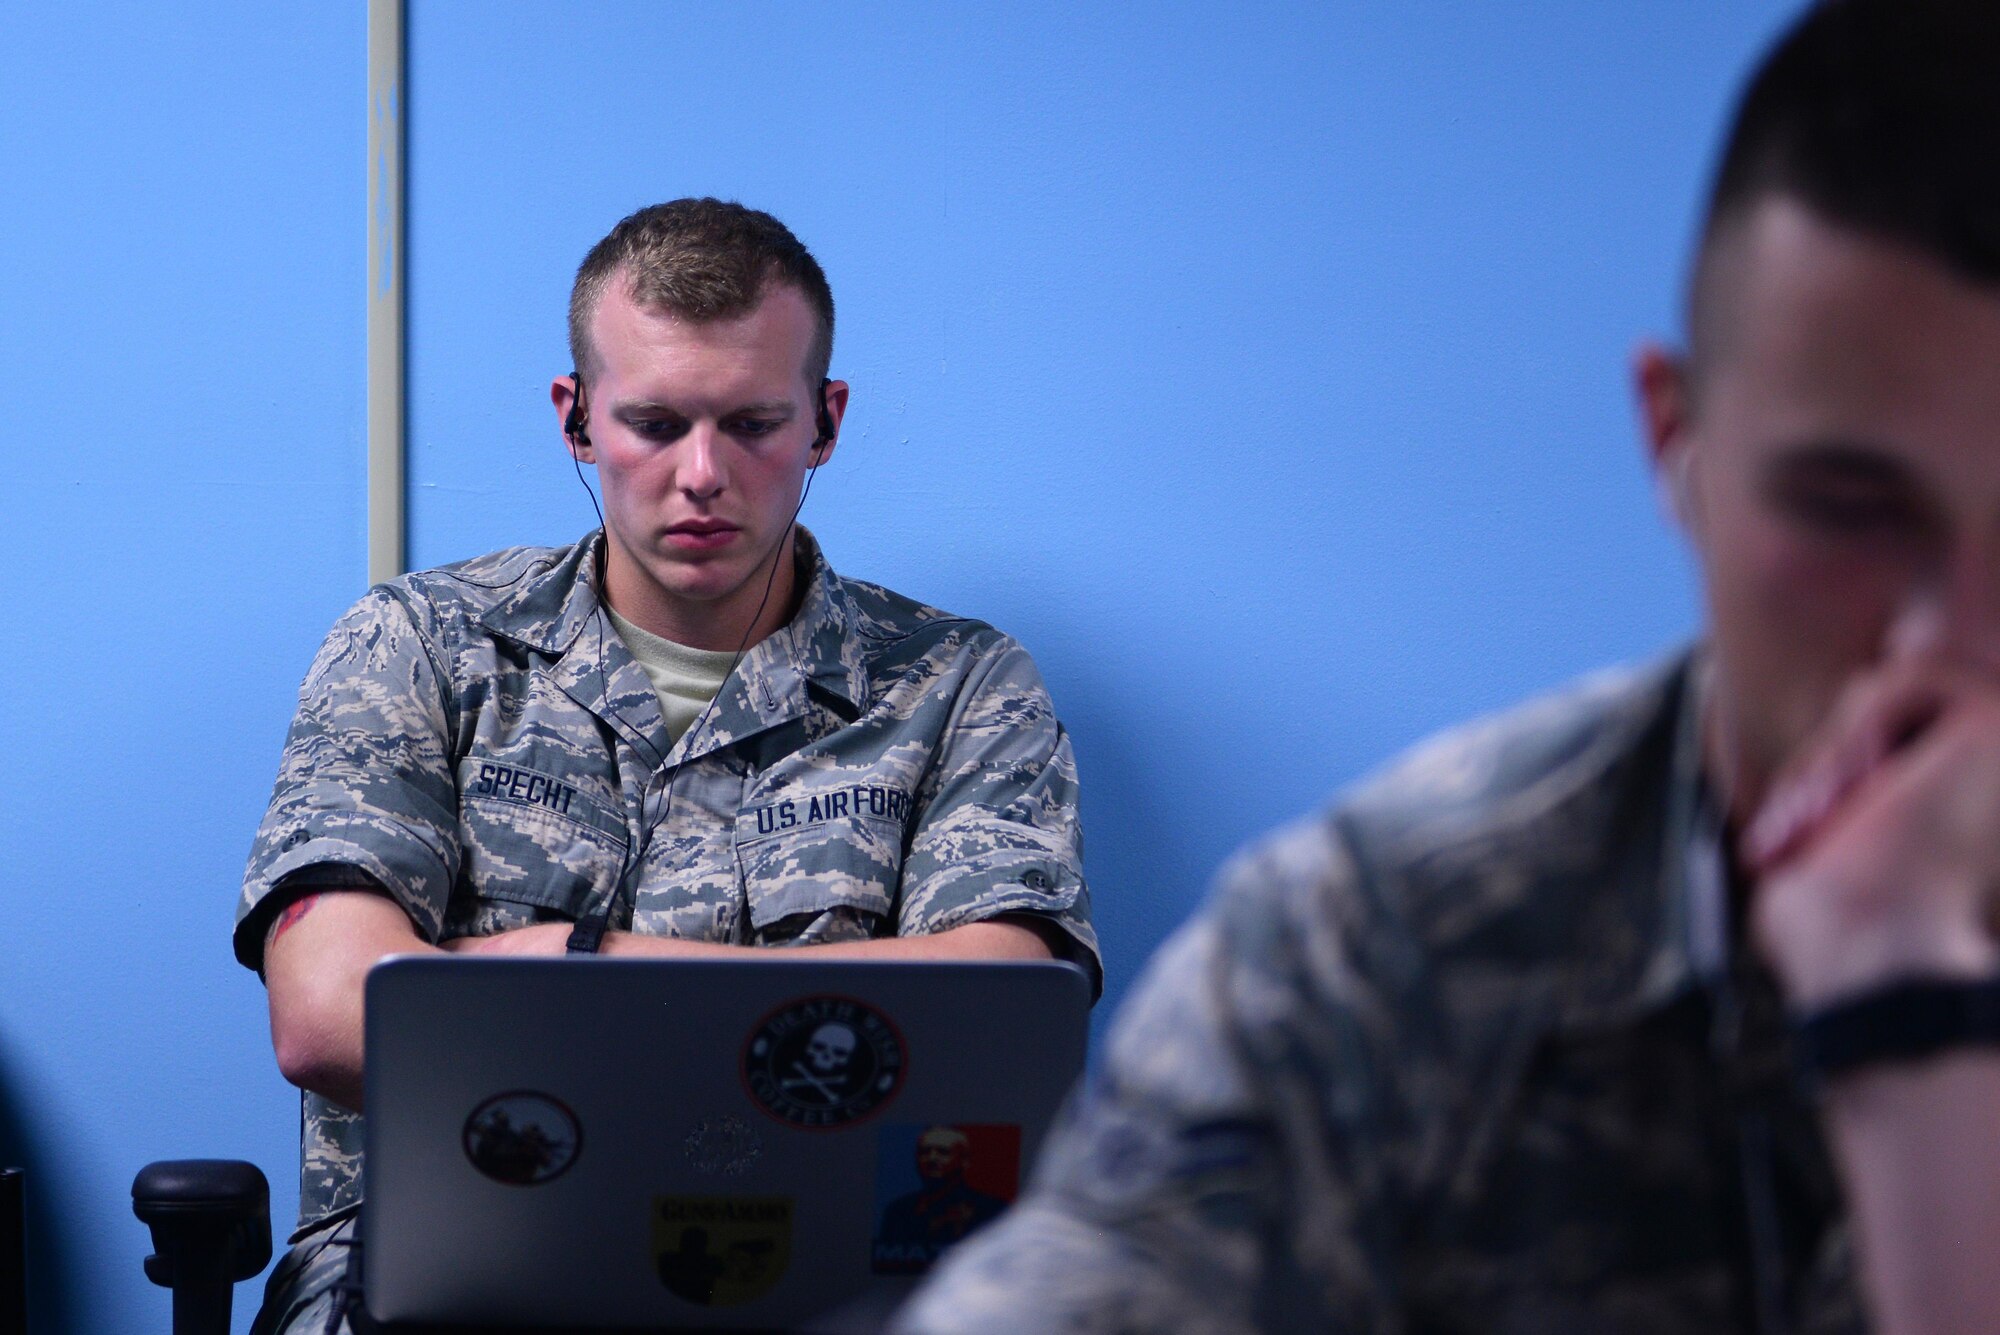 Airman Basic Gregory Specht, 338th Training Squadron student, studies course material in one of the cyber transport course’s ‘flipped’ classrooms in Bryan Hall, May 10, 2017, on Keesler Air Force Base, Miss. The squadron’s ‘flipped’ classrooms feature a student-centered approach where Airmen are able to work at their own pace in an environment that’s catered to student discovery and engagement instead of the normal educational trend of teacher-led instruction. (U.S. Air Force photo by Senior Airman Duncan McElroy) 